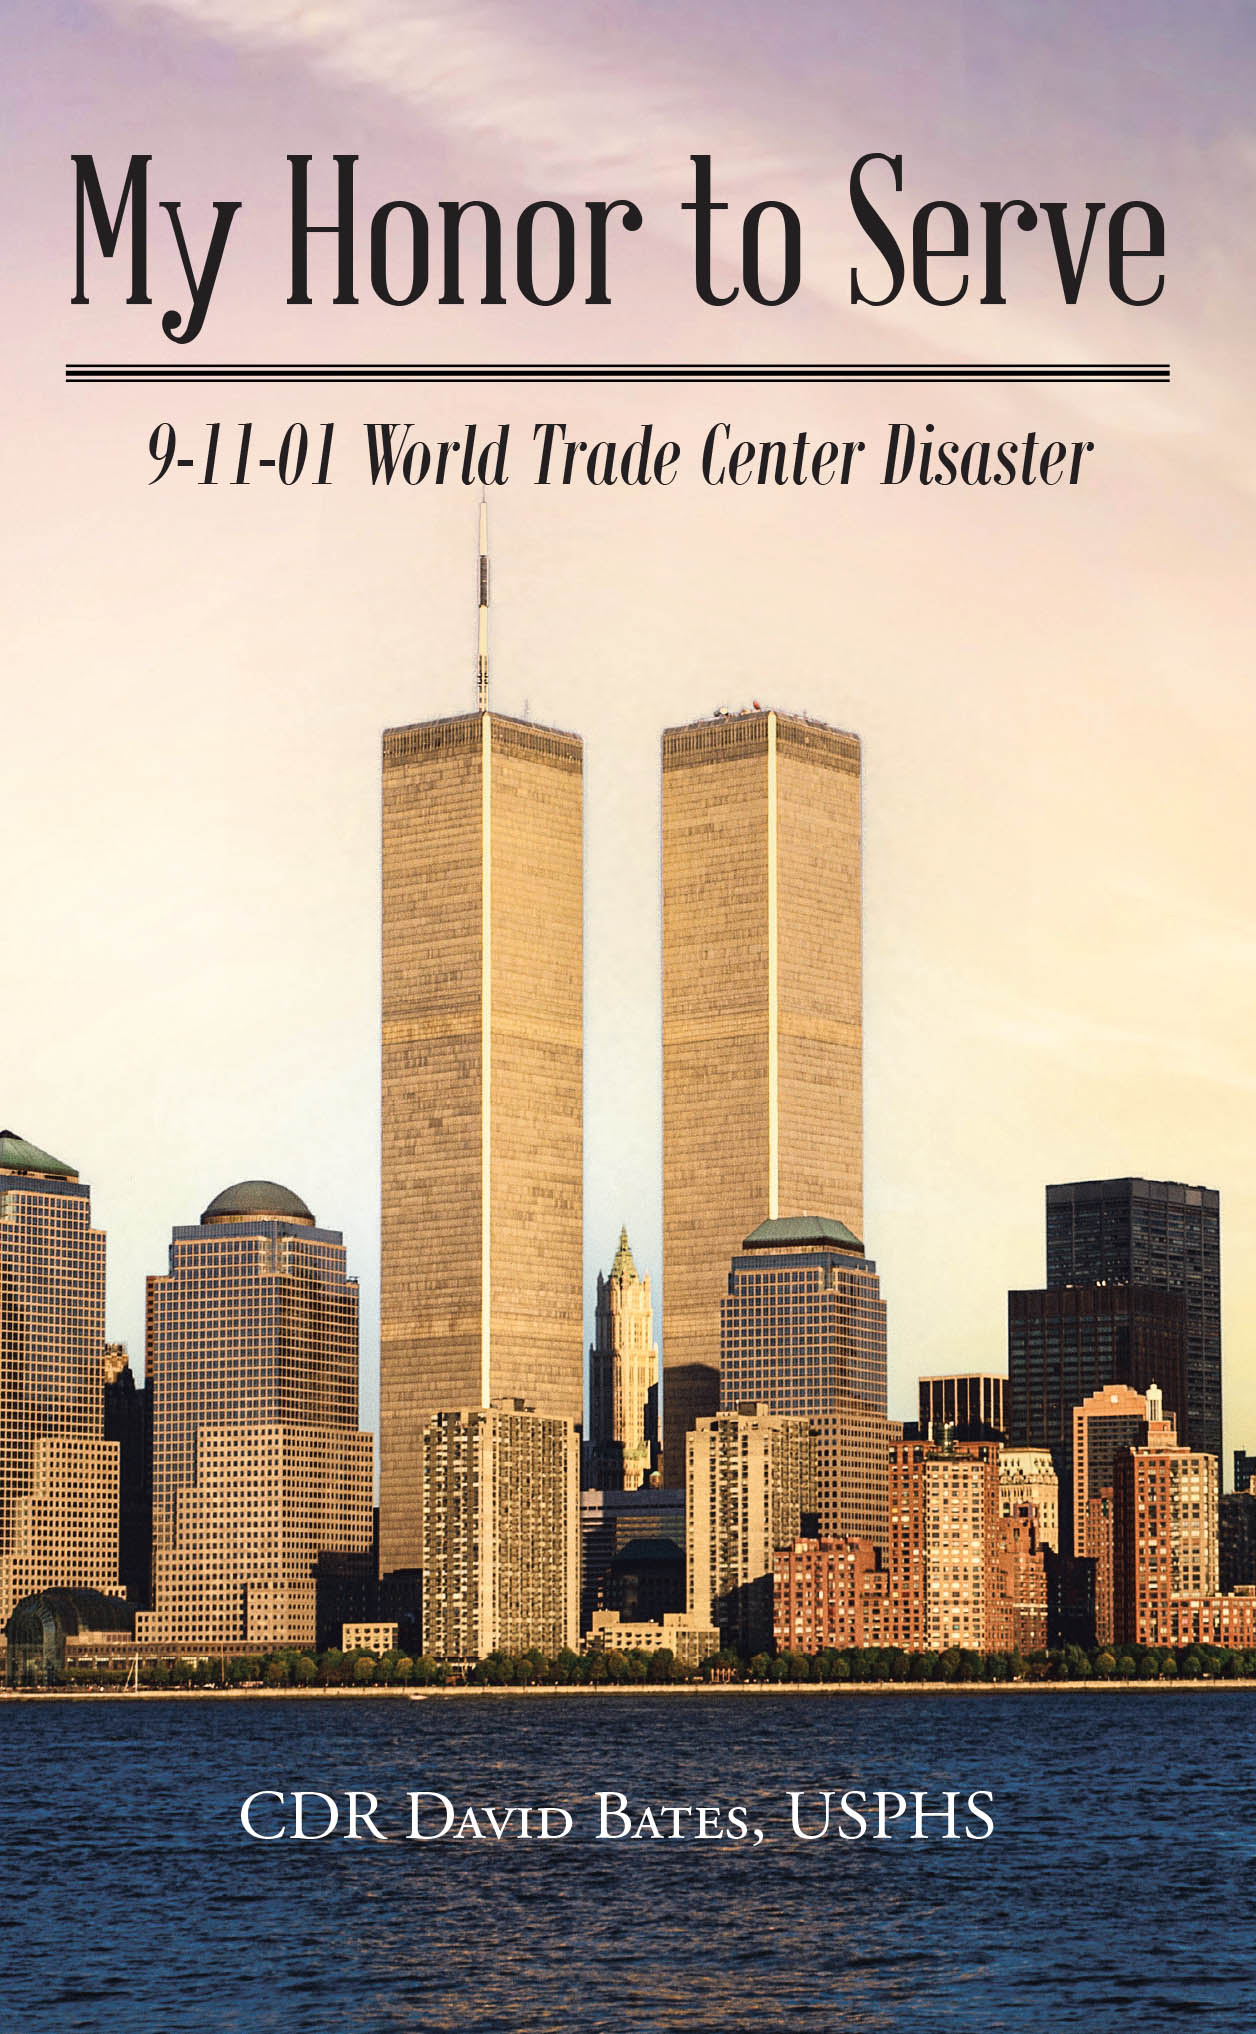 CDR David Bates, USPHS’s Newly Released “My Honor to Serve: 9-11-01 World Trade Center Disaster” is a Riveting Account of Heroism and Service